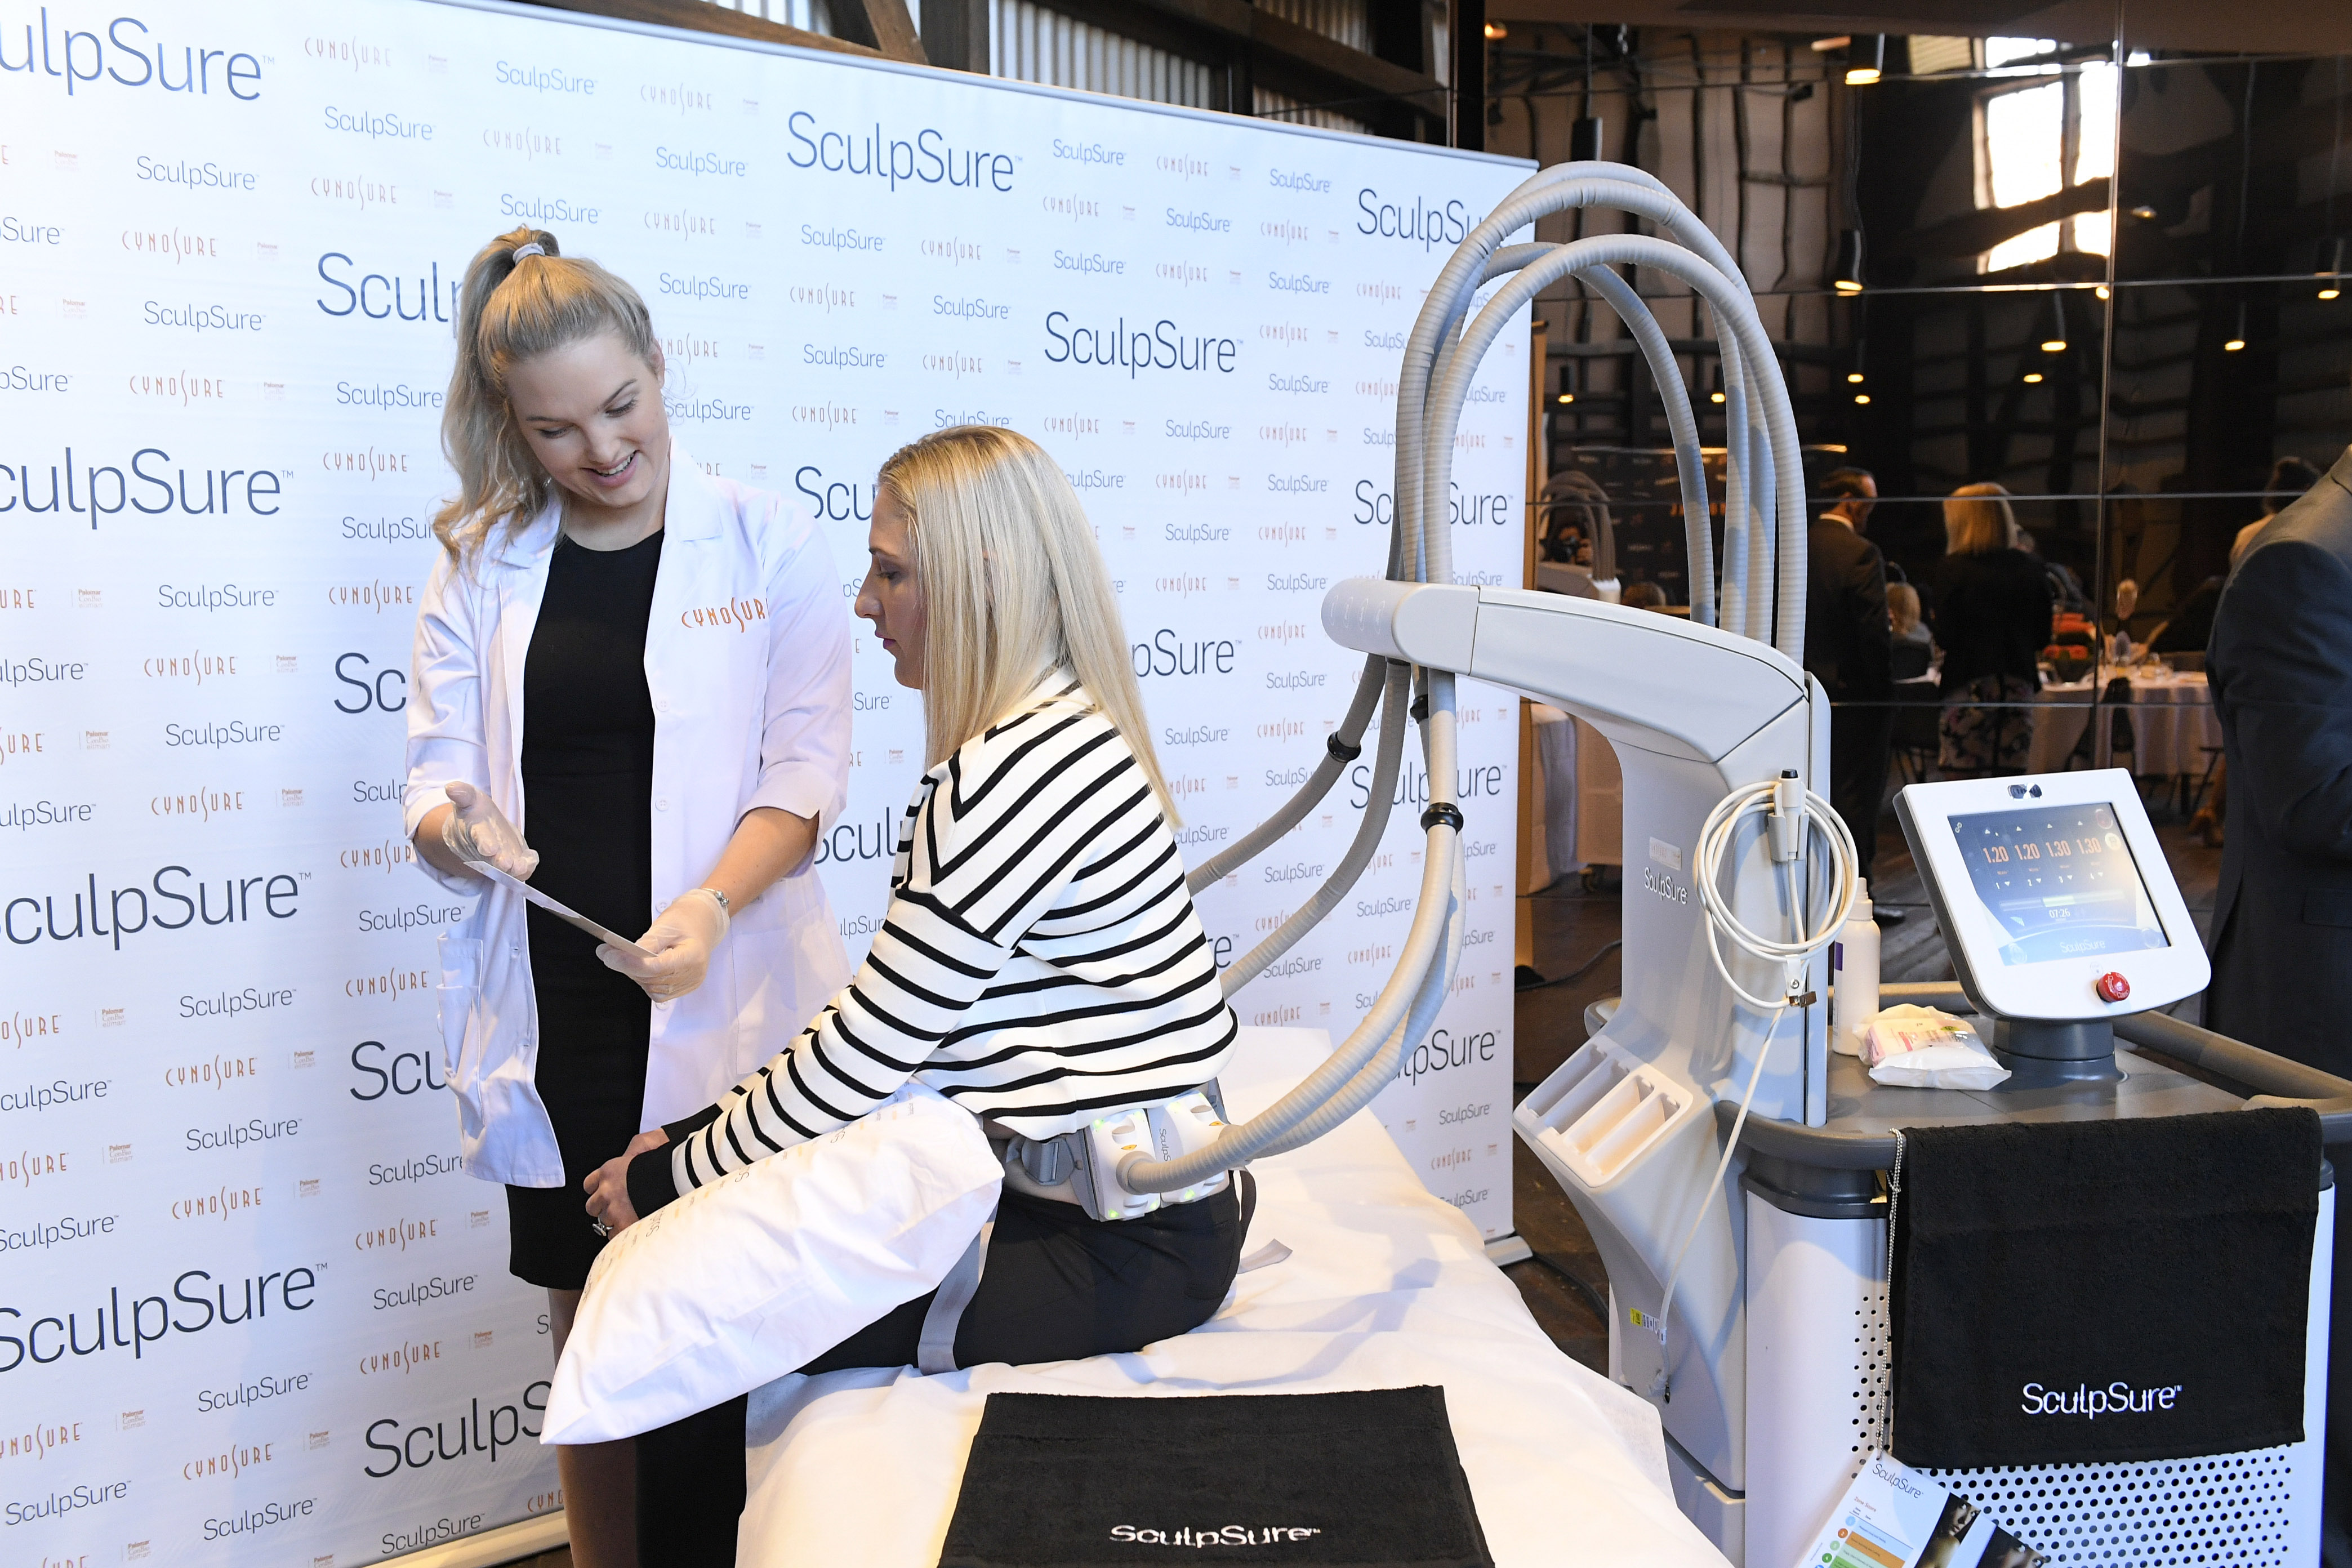 Demonstrating the new SculpSure machine. Over half the women surveyed said they were open to alternative body sculpting methods like laser.